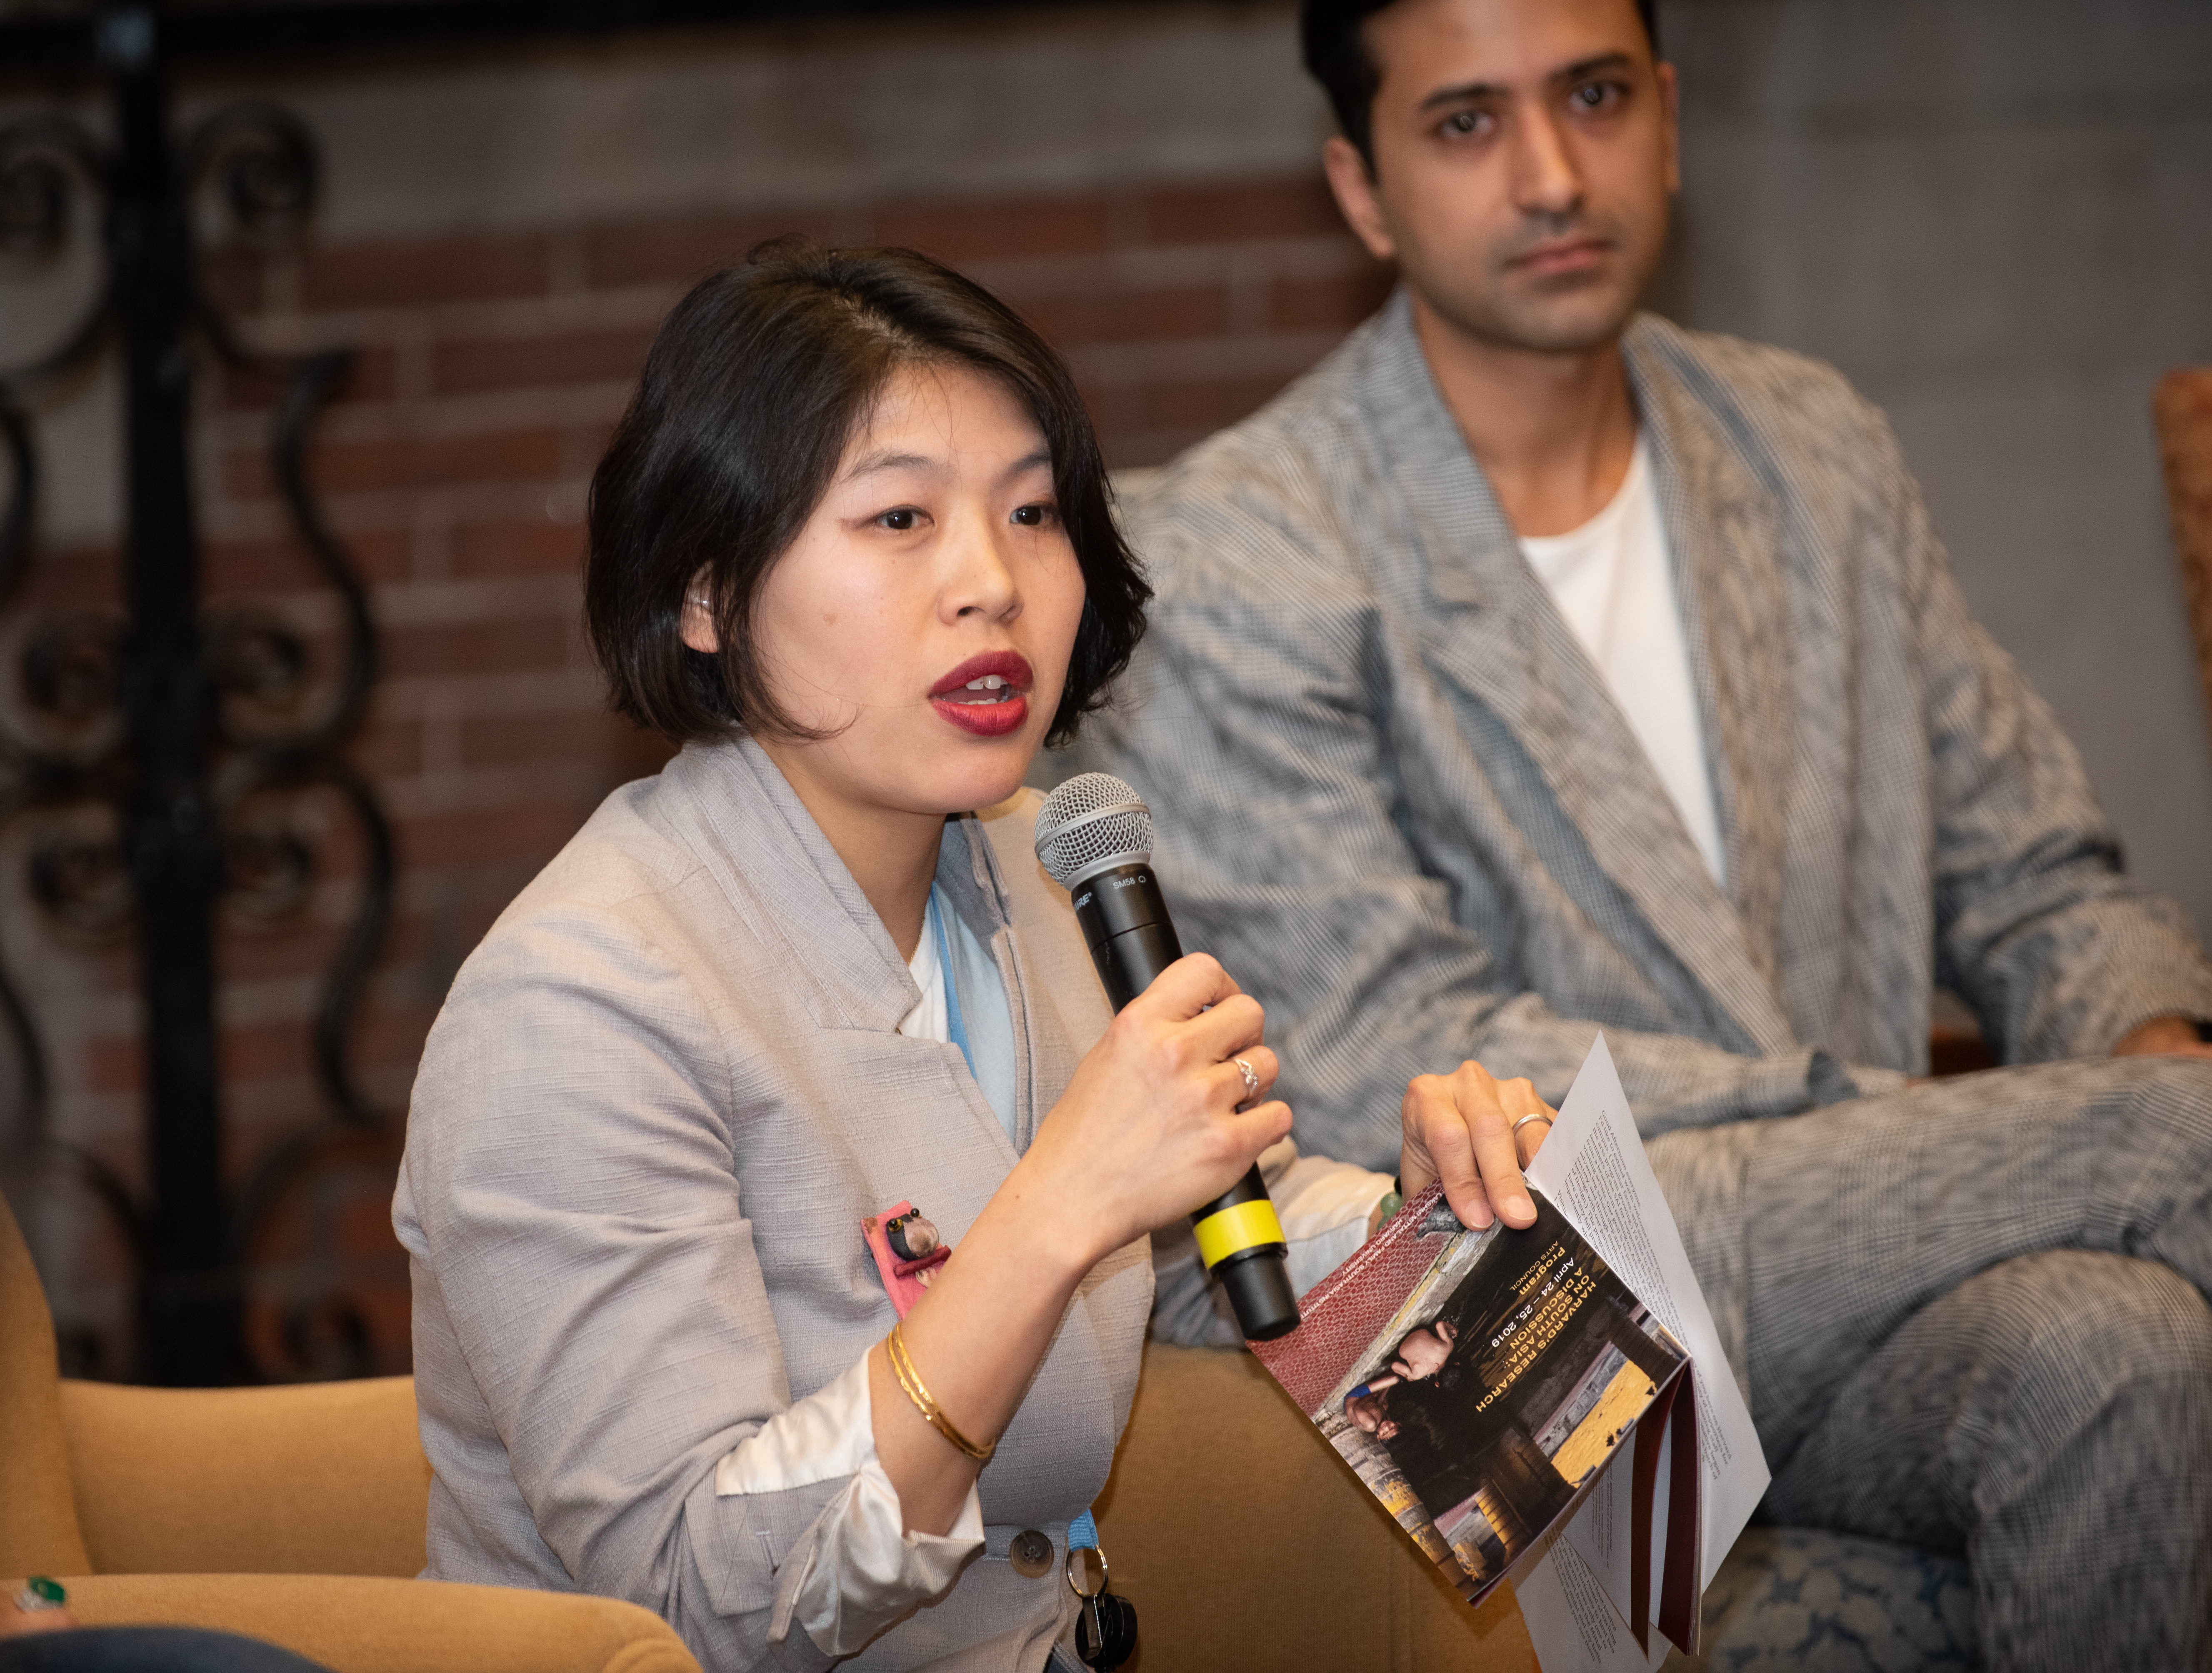 Jinah Kim and Shanay Javeri (background) speak during the Arts in South Asia session.